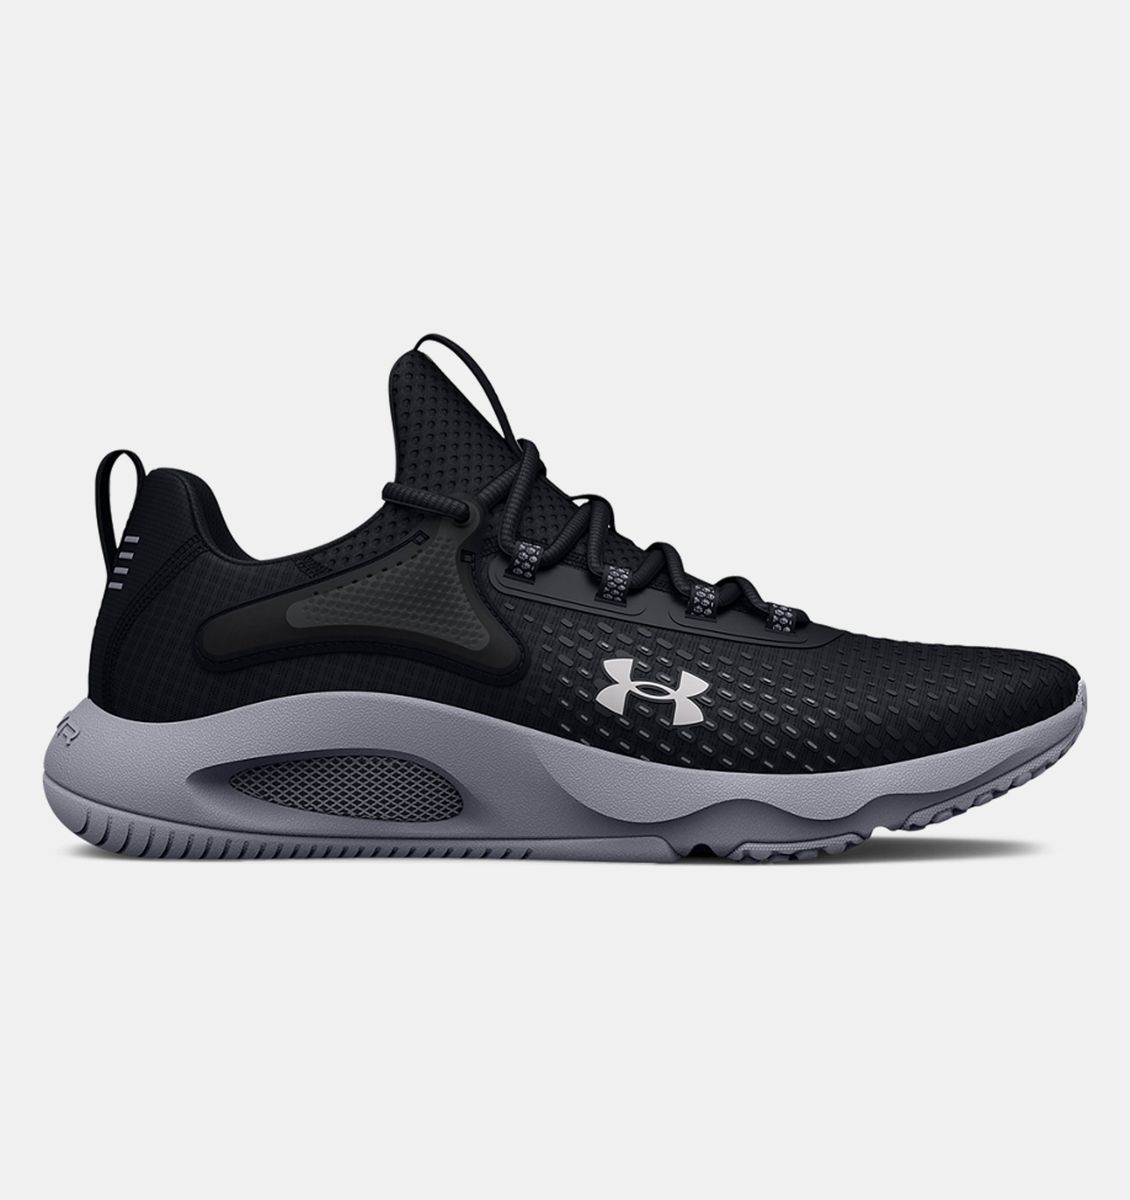 Under Armour Men's Hovr Rise 4 Training Shoes - Black/Mod Gray/Halo ...